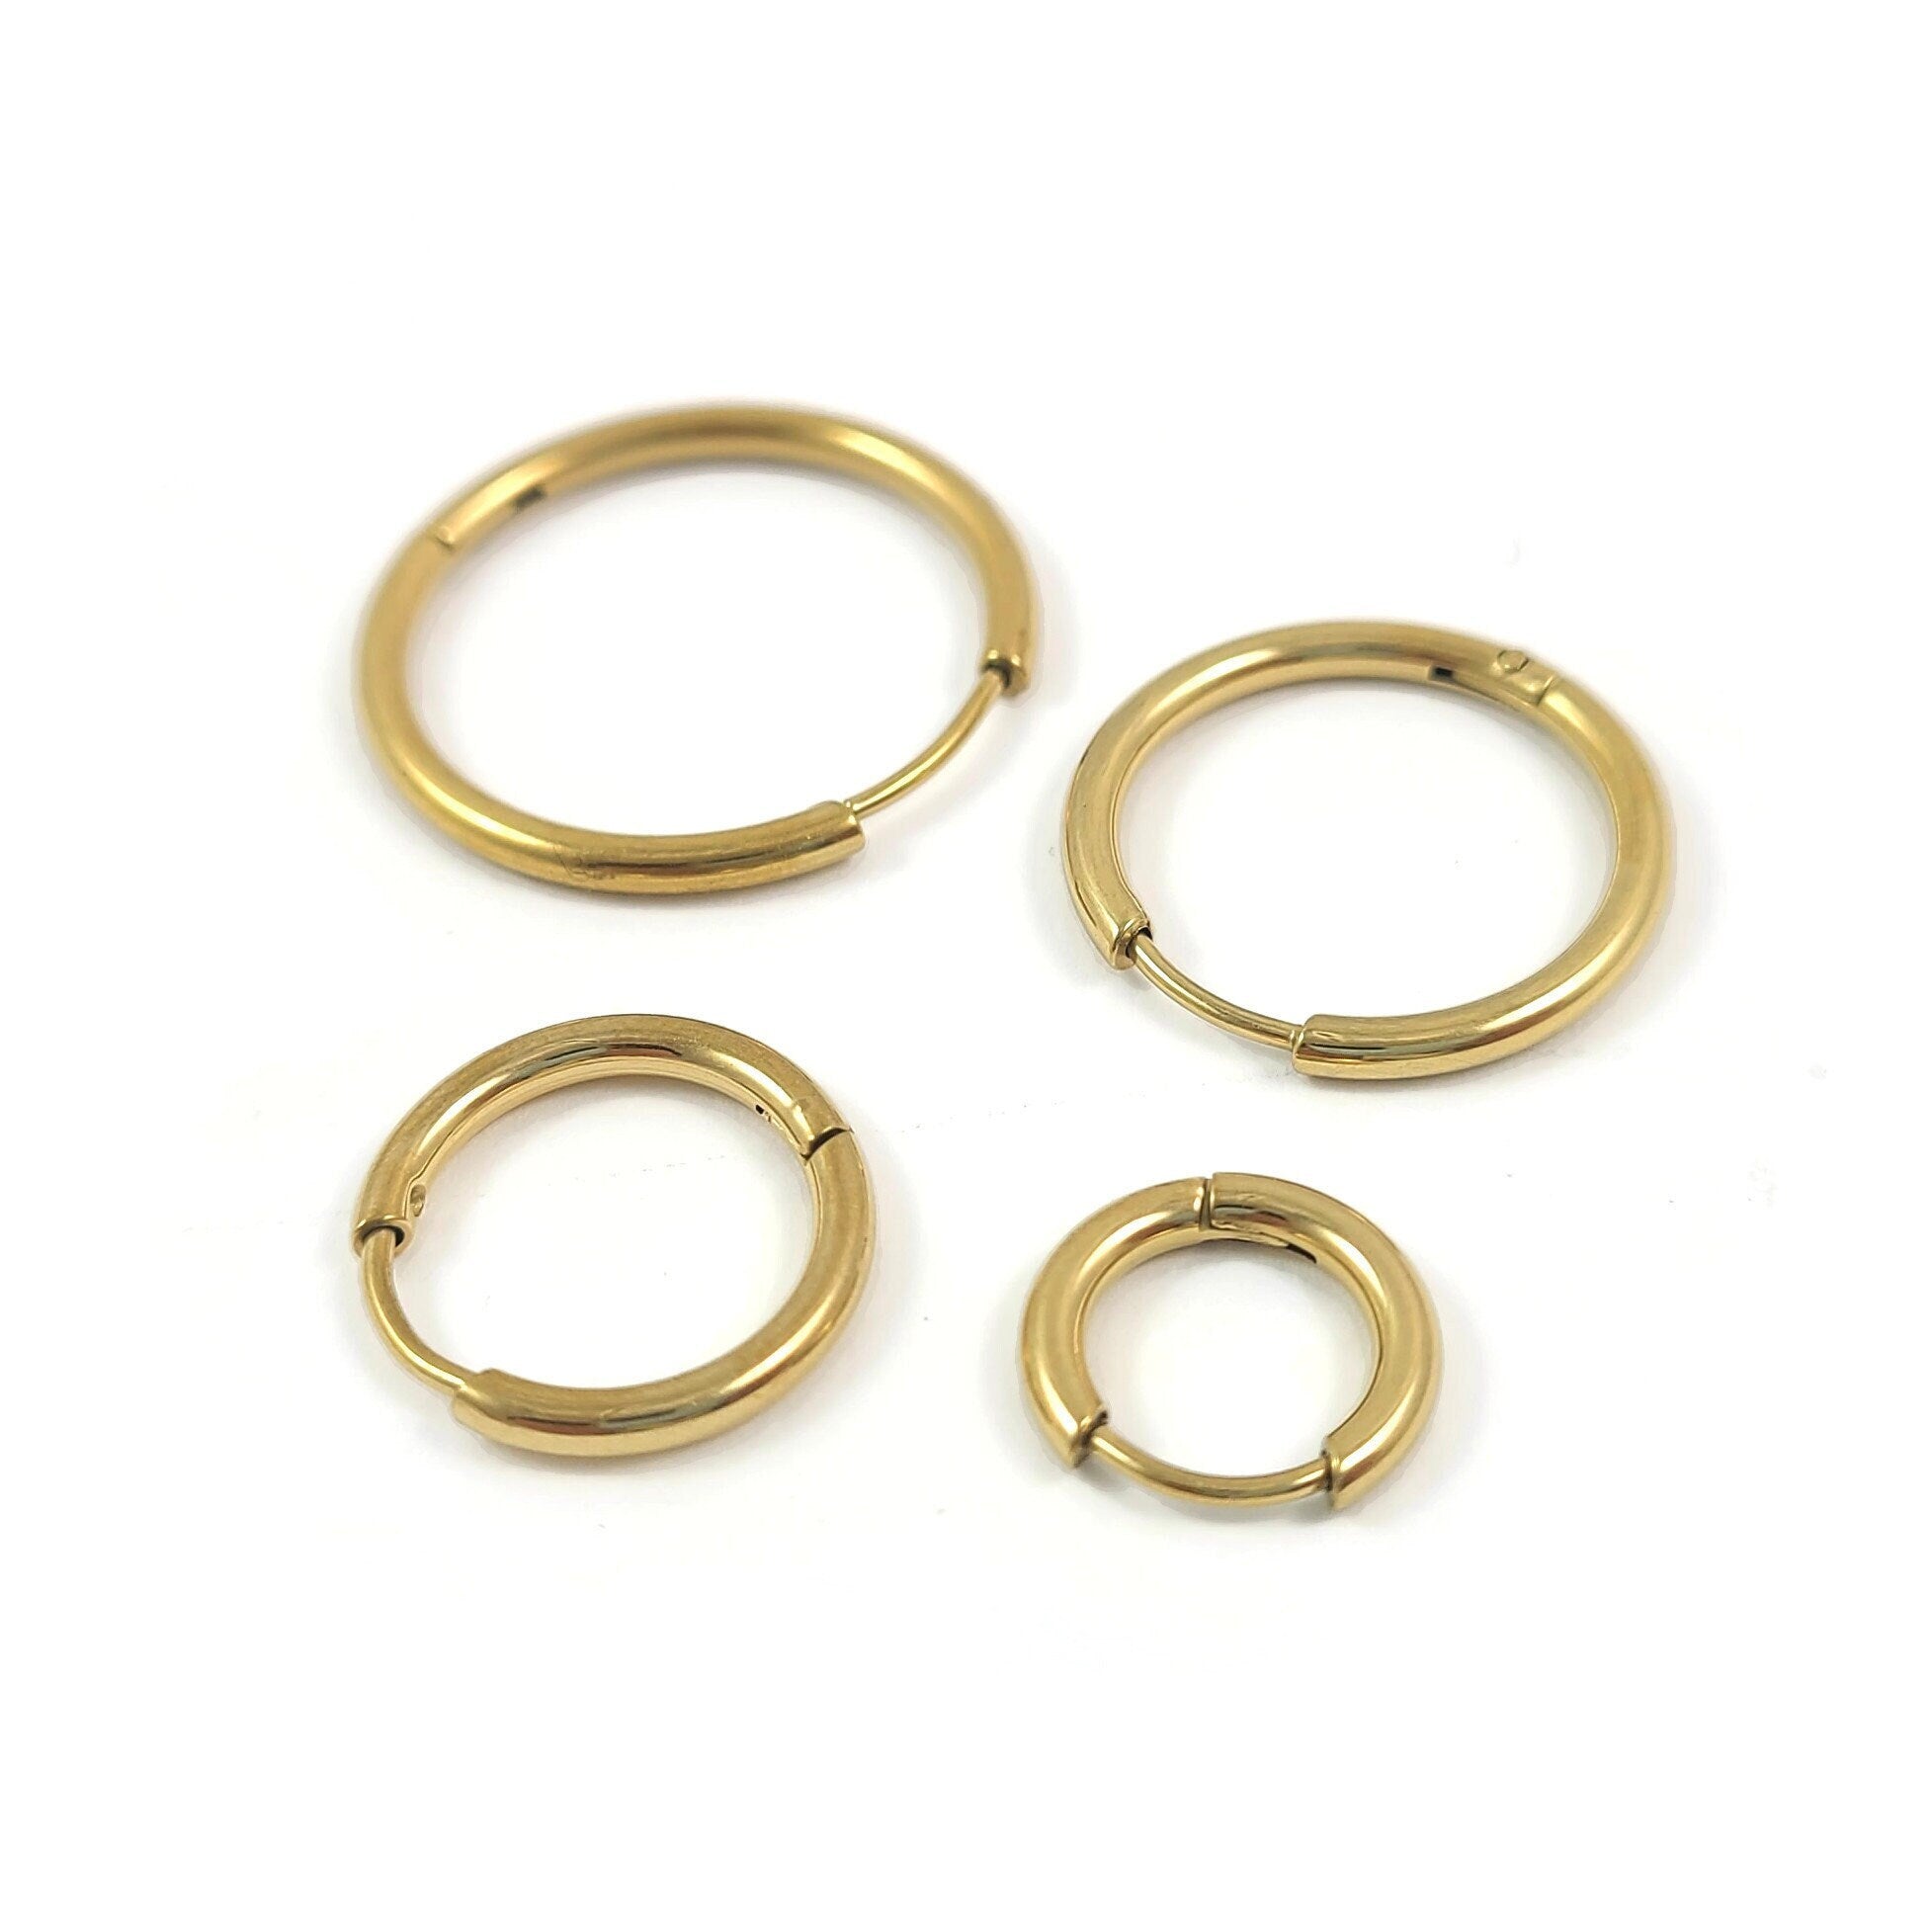 10pcs Gold Round Leverback Earring Hooks With 7 Loops, Earring Finding  Wholesale GB-3454 